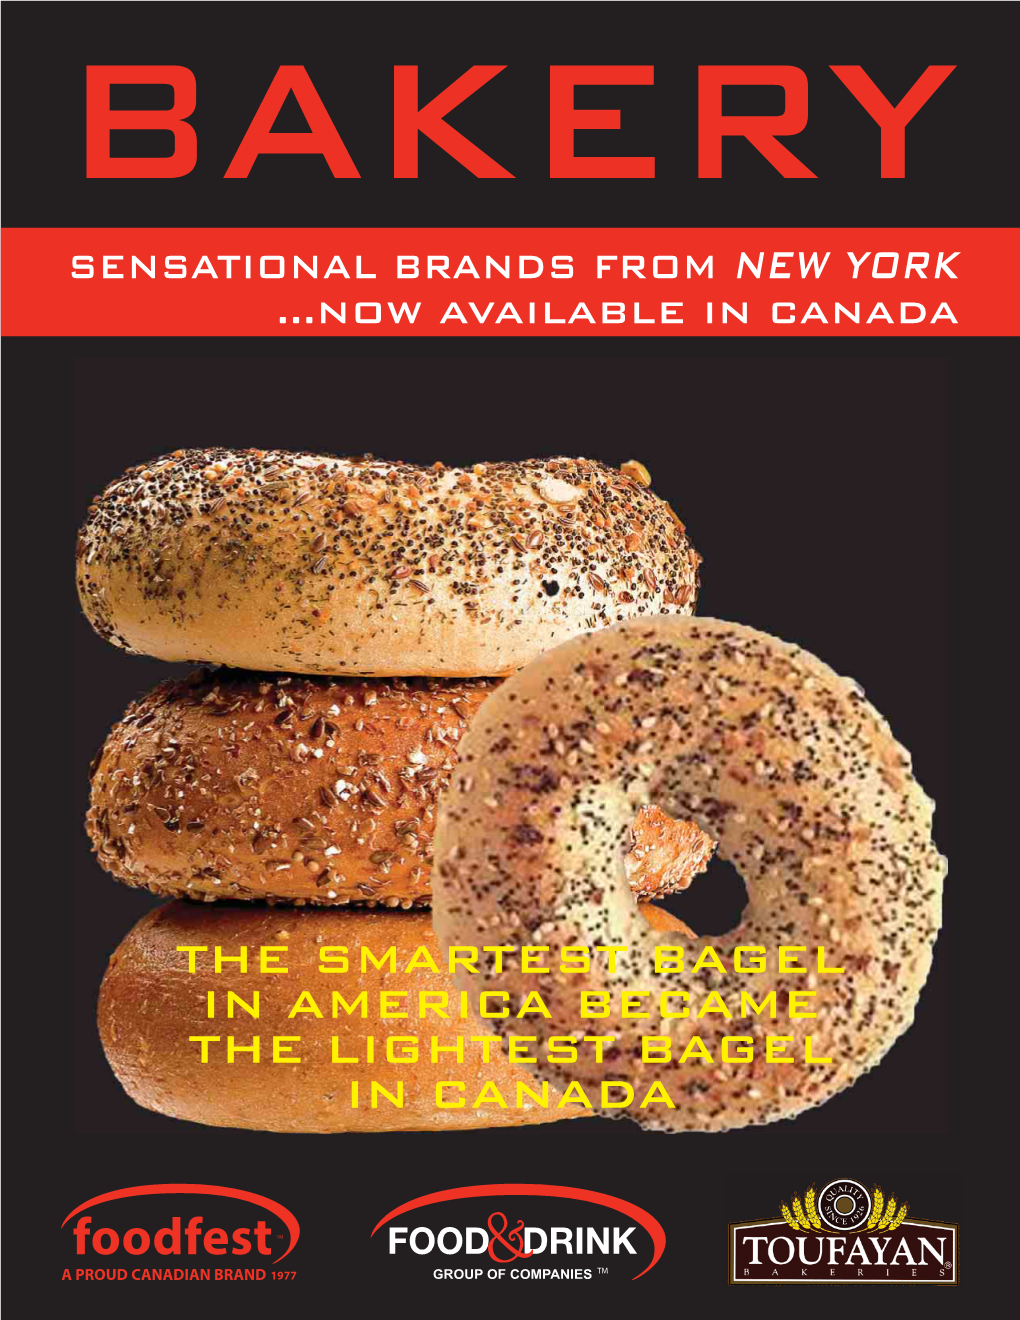 The Smartest Bagel in America Became the Lightest Bagel in Canada